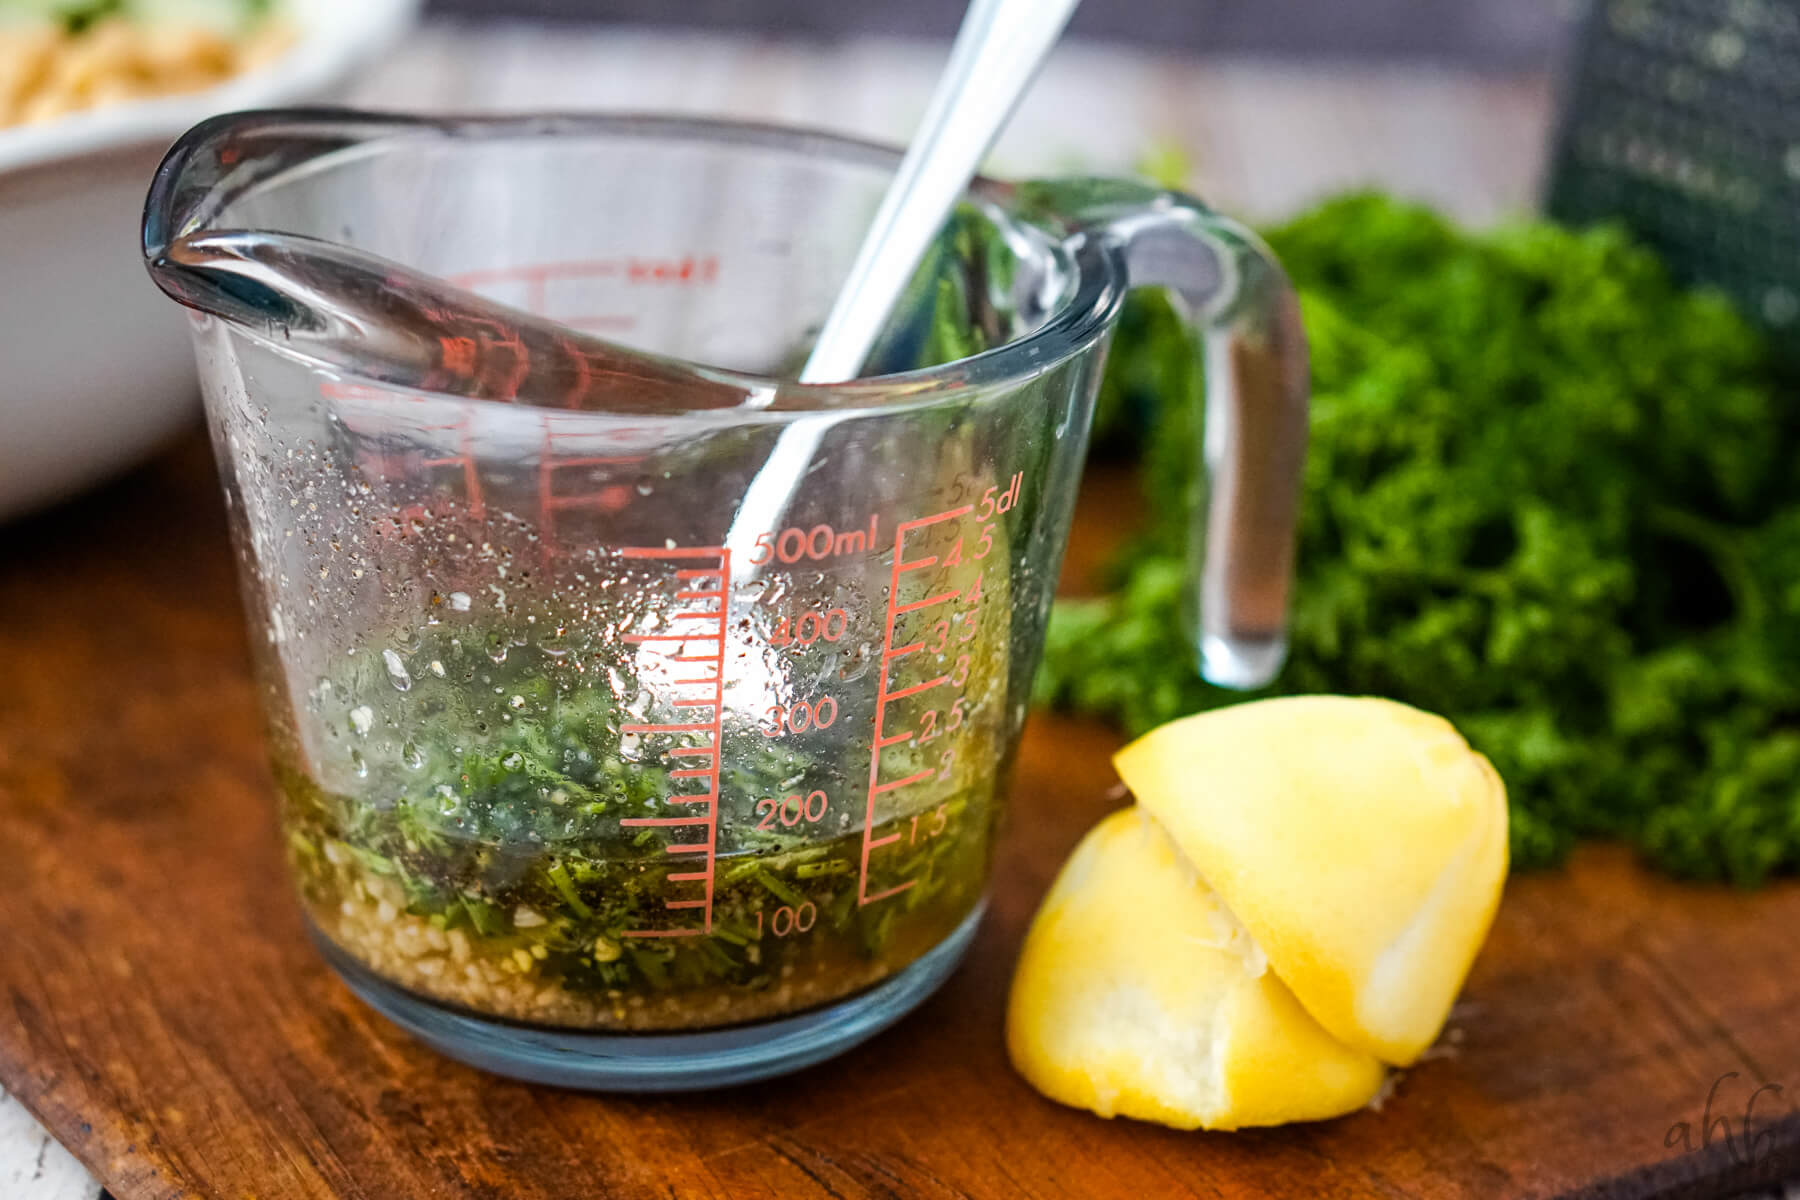 A glass measuring cup is filled with the ingredients for the salad dressing and is stirred with a fork.